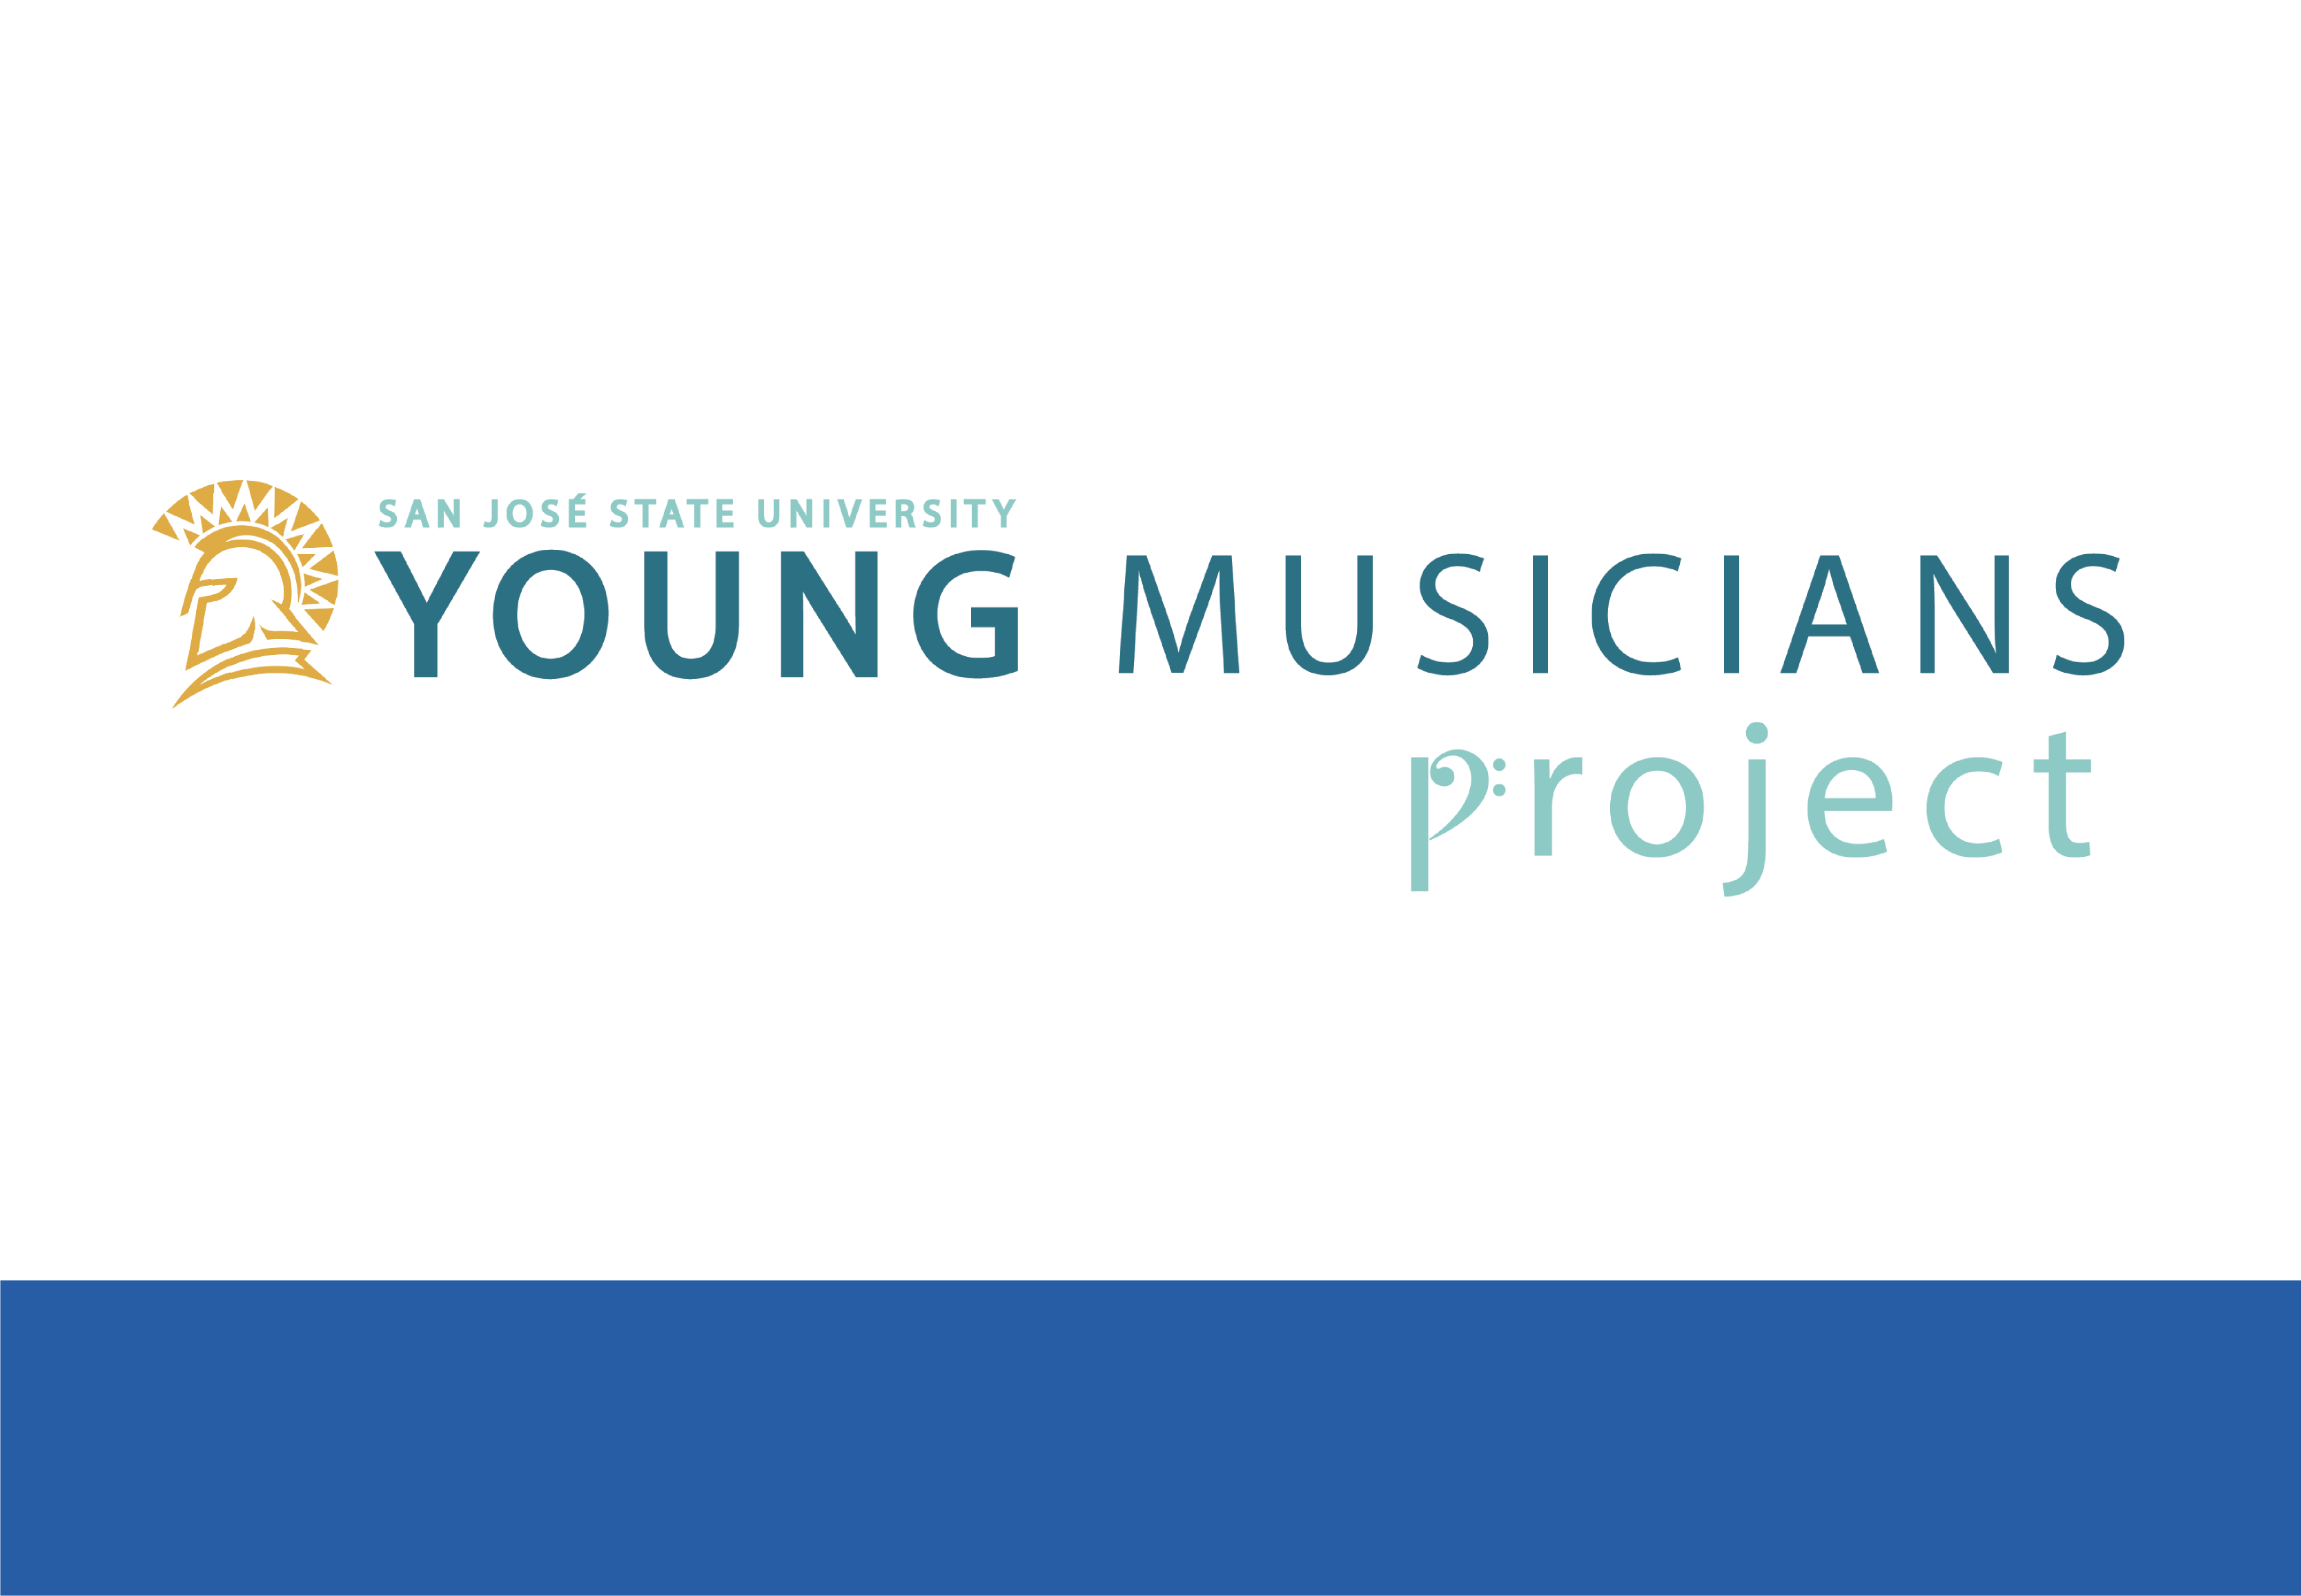 Young Musicians Prject